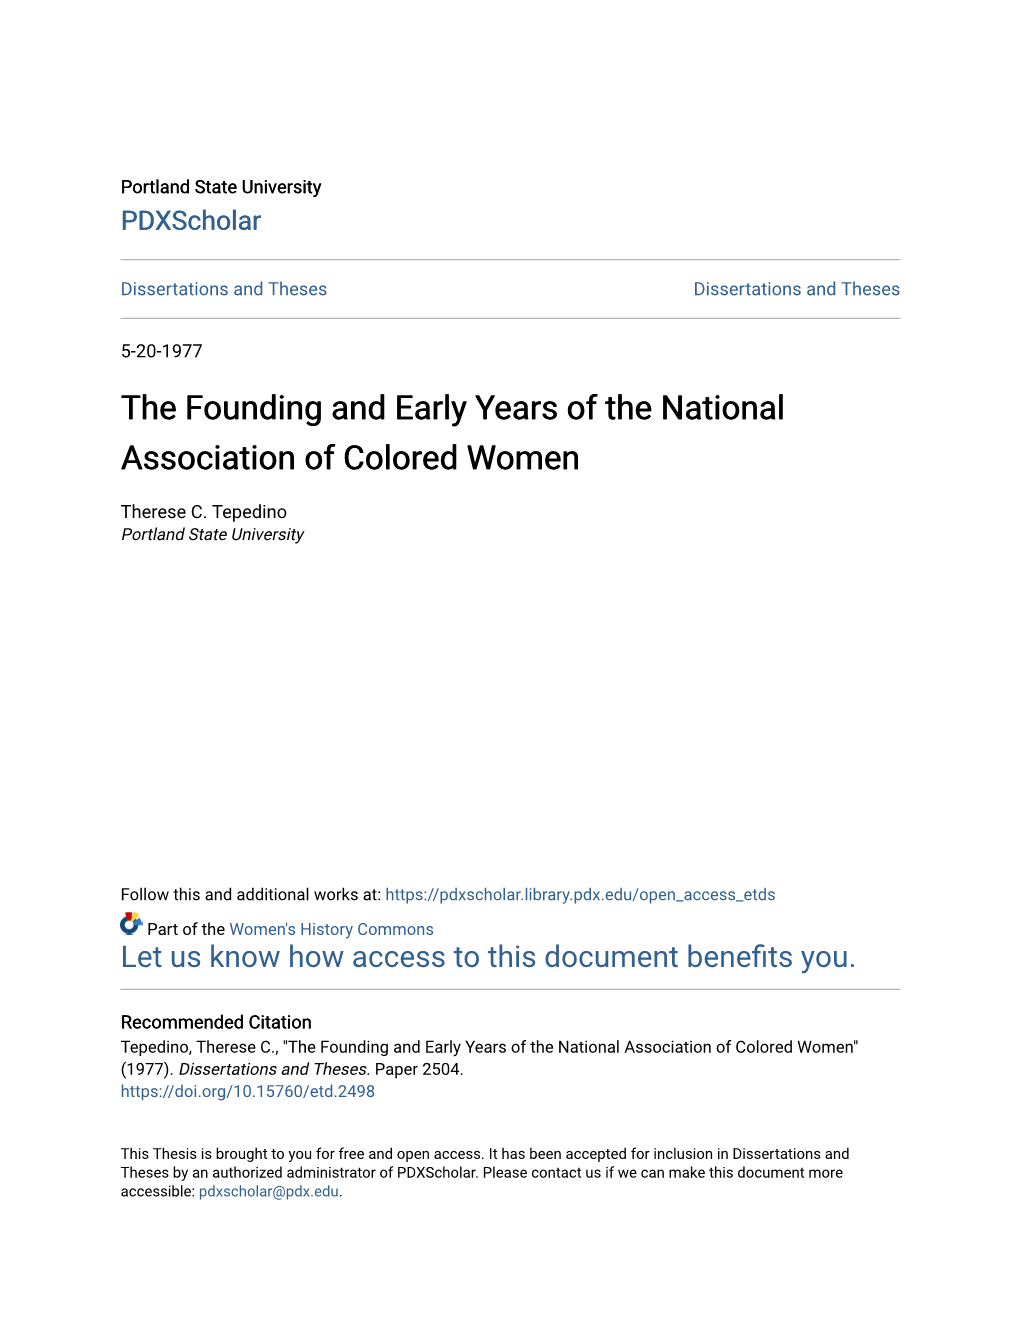 The Founding and Early Years of the National Association of Colored Women